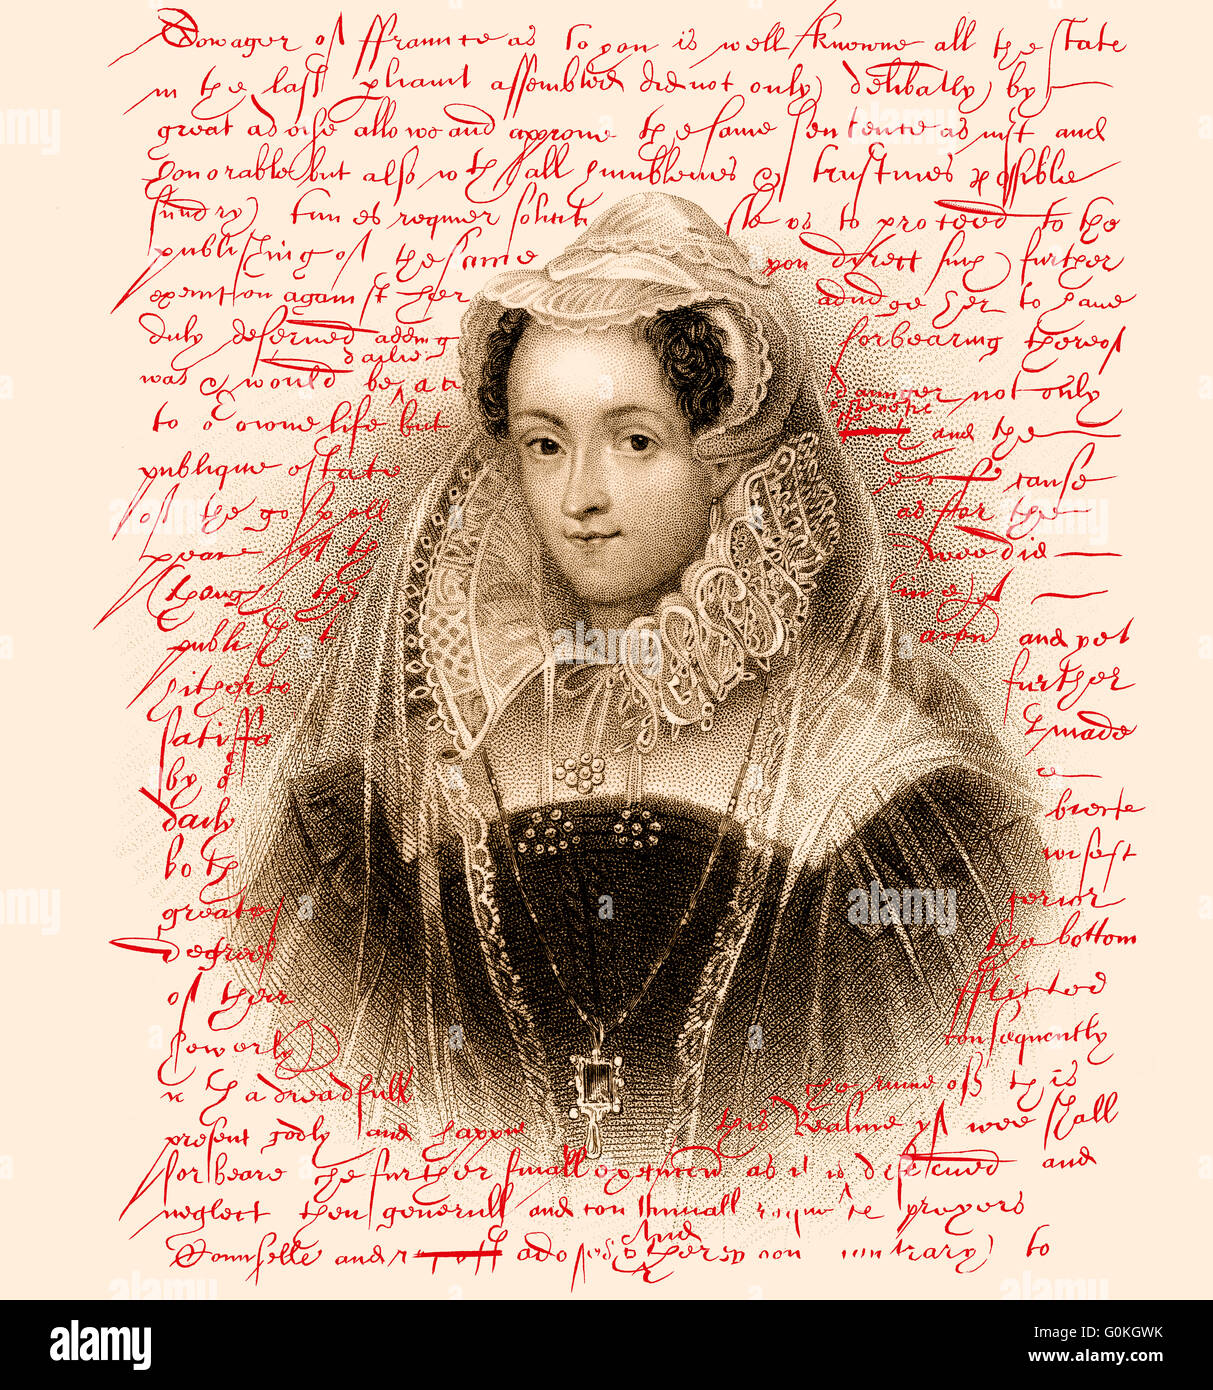 Facsimile, the warrant of execution of Mary Stuart, Queen of Scots, written by Elizabeth I, 1533-1603, Queen of England, on Febr Stock Photo